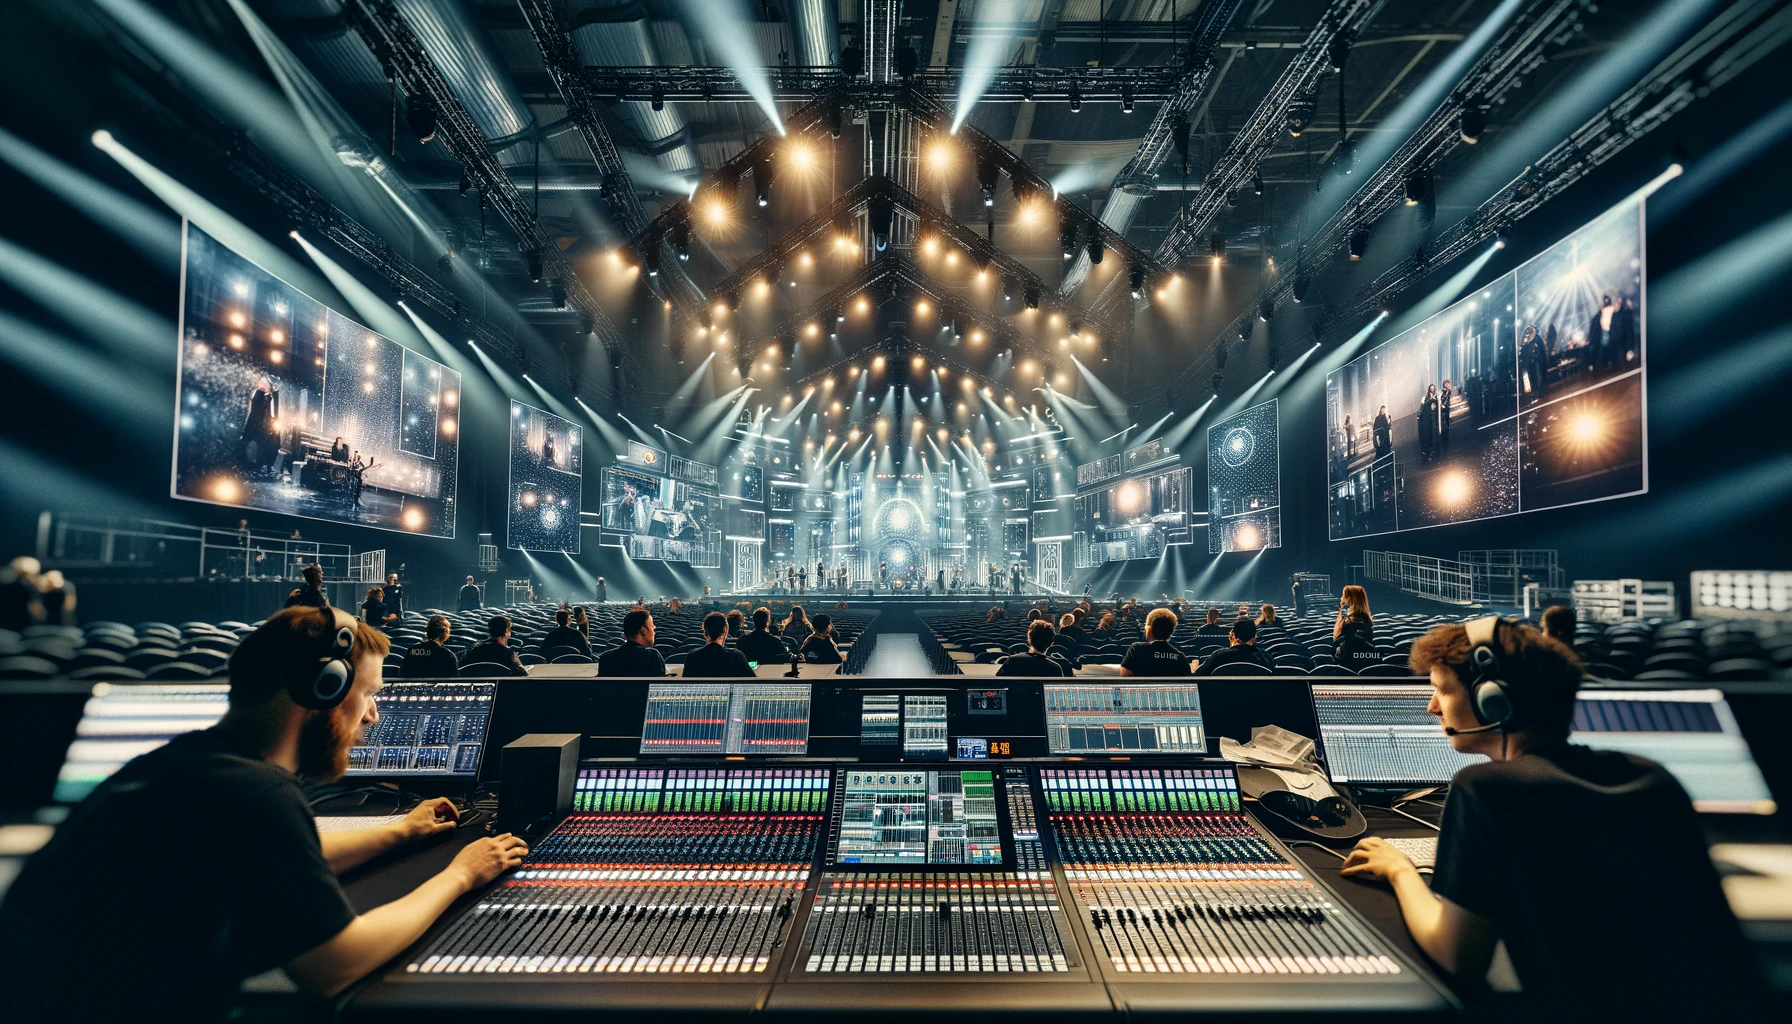 The Tips & Tricks of Live Event Production